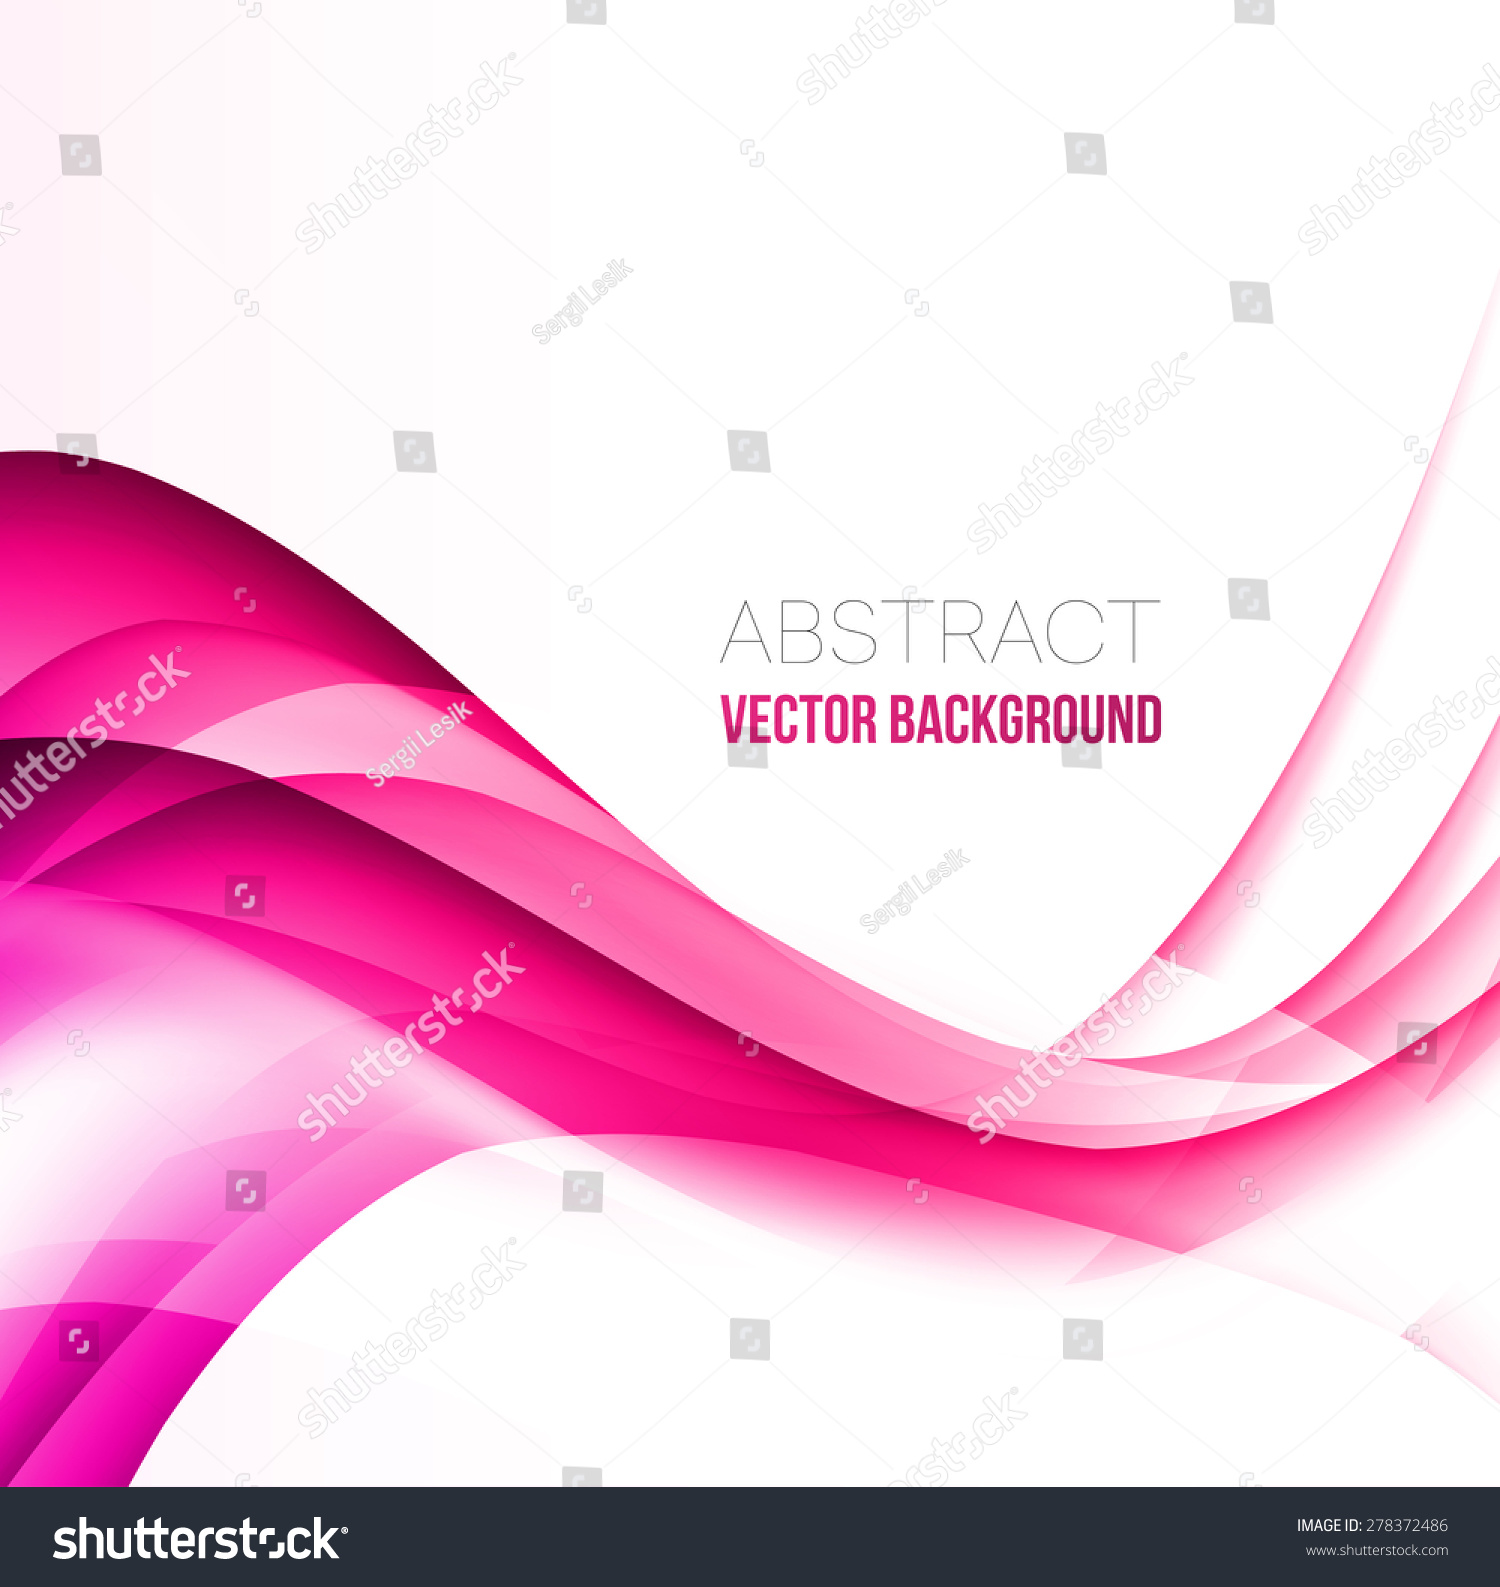 Vector Abstract Pink Curved Lines Background Stock Vector 278372486 ...